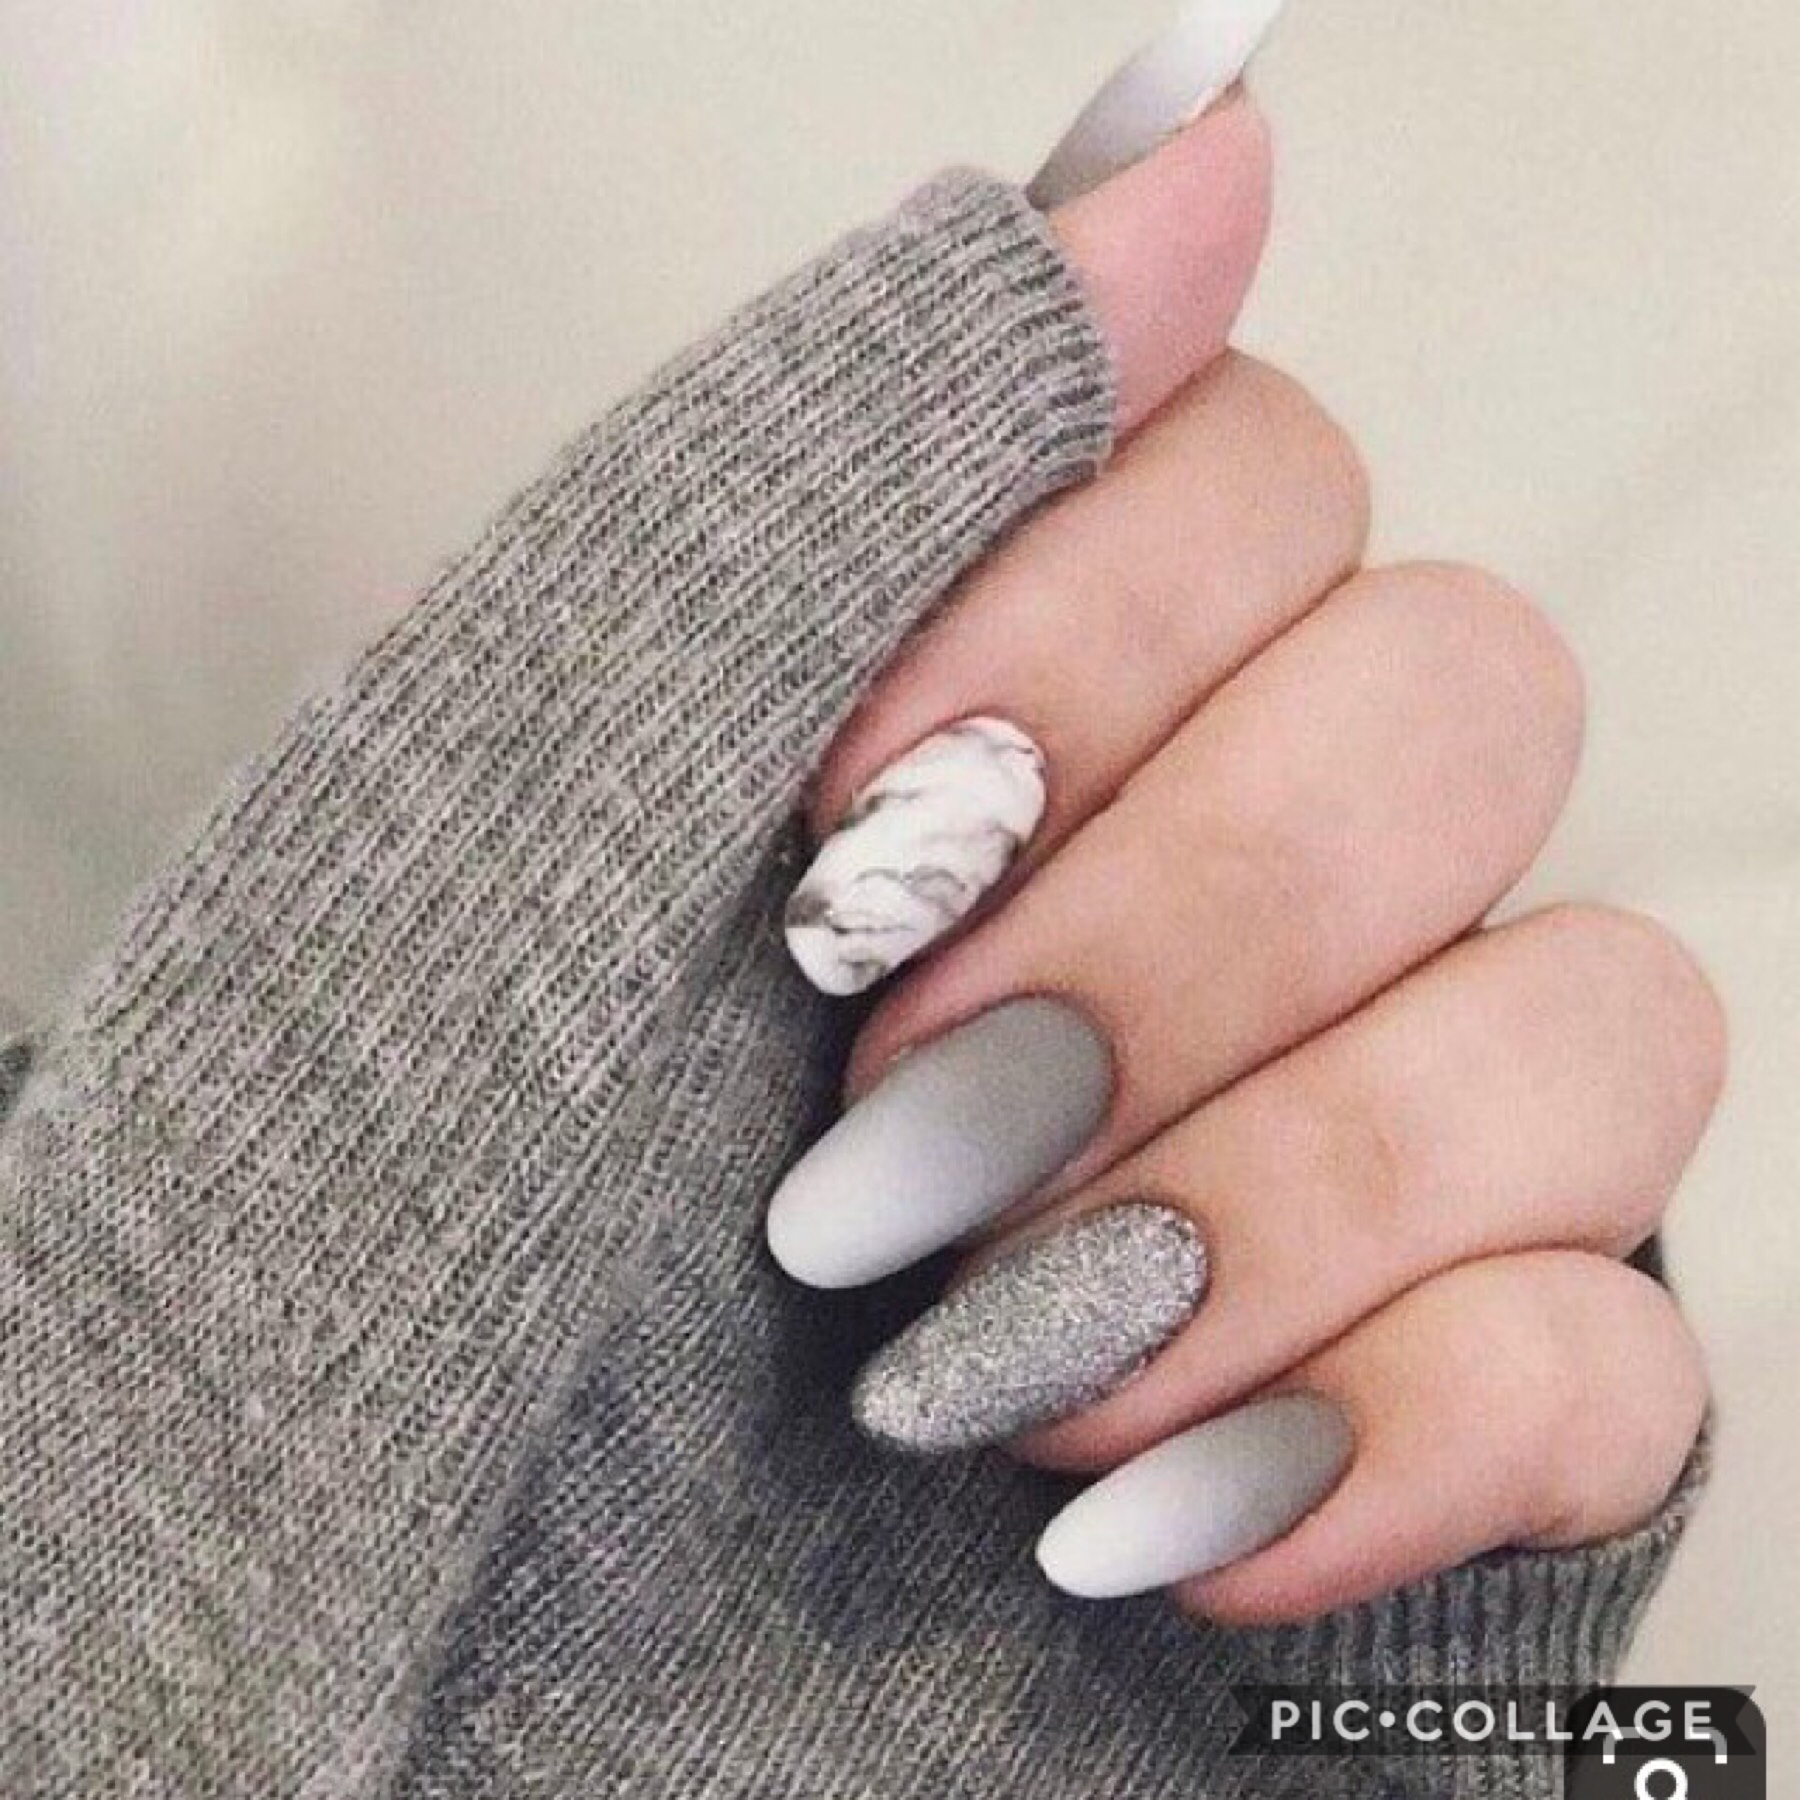 Gray and White nails
5-26-19